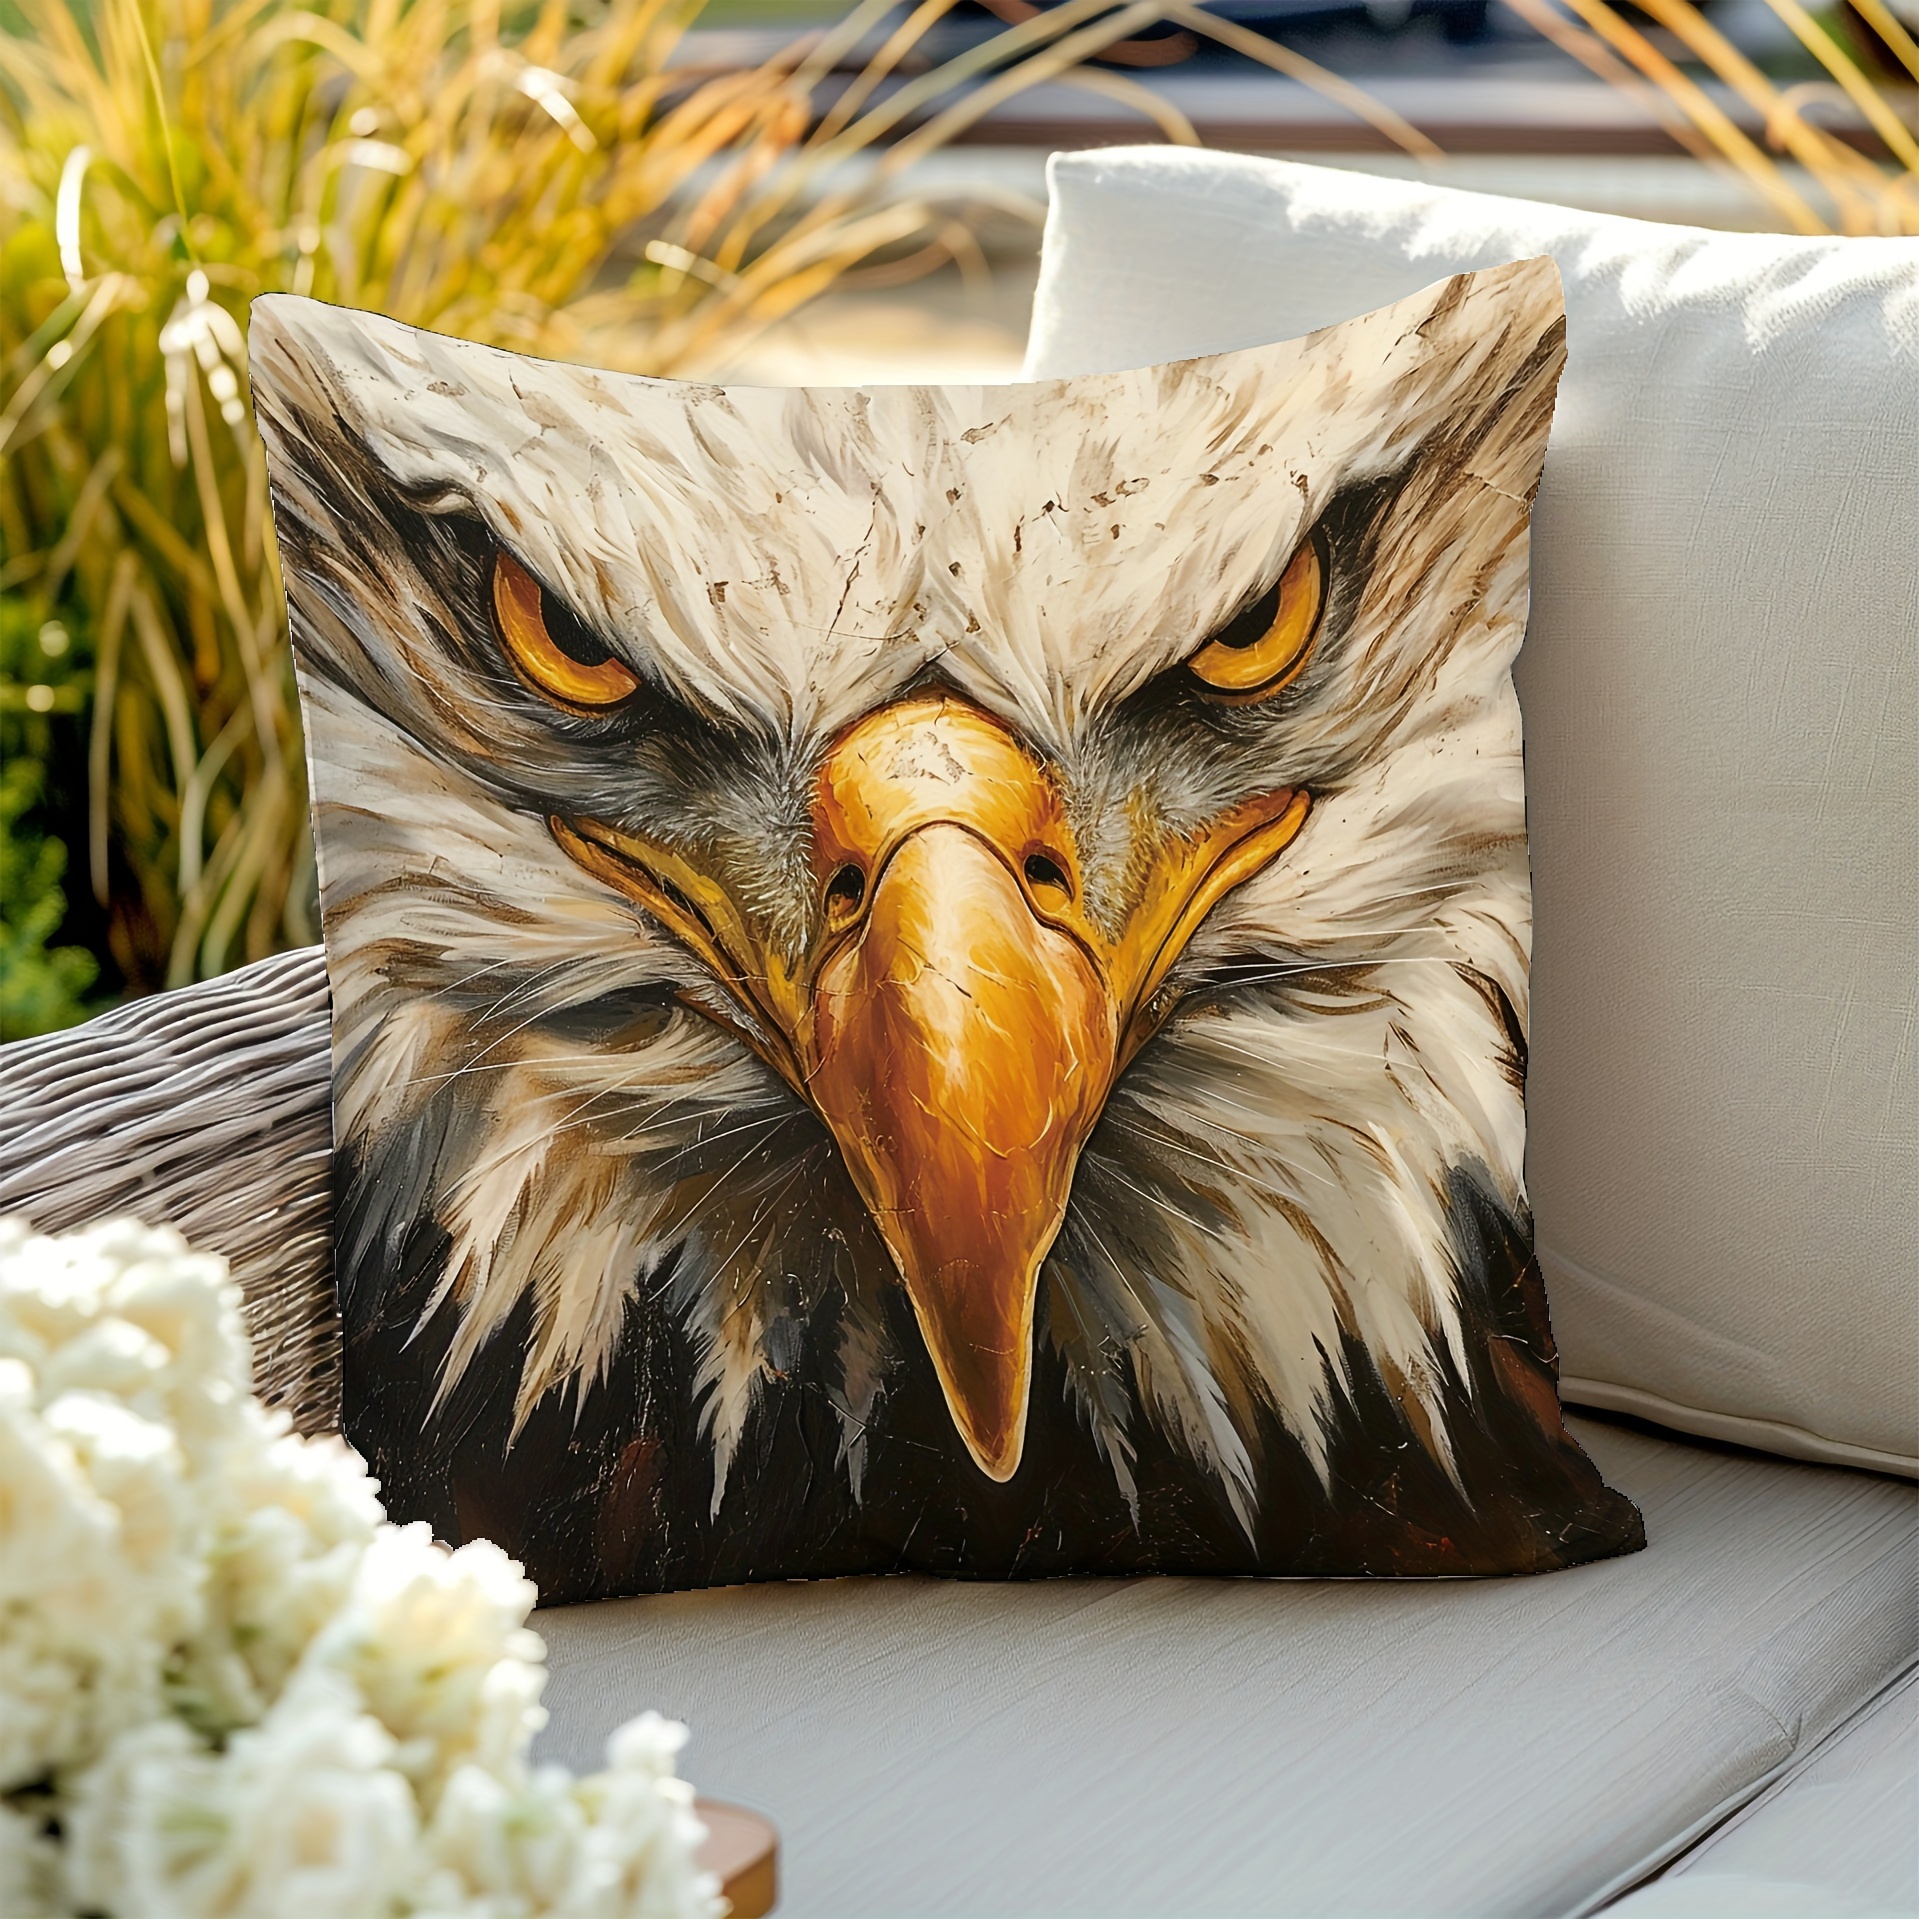 

1pc, Eagle, , Animal, Fashion Pattern, Printed Pillowcase, Home Decor, Room Decor, Living Room Decor, Bedroom Decor, Sofa Decor, Throw Pillow Case, 18in*18in, Pillow Insert Not Included